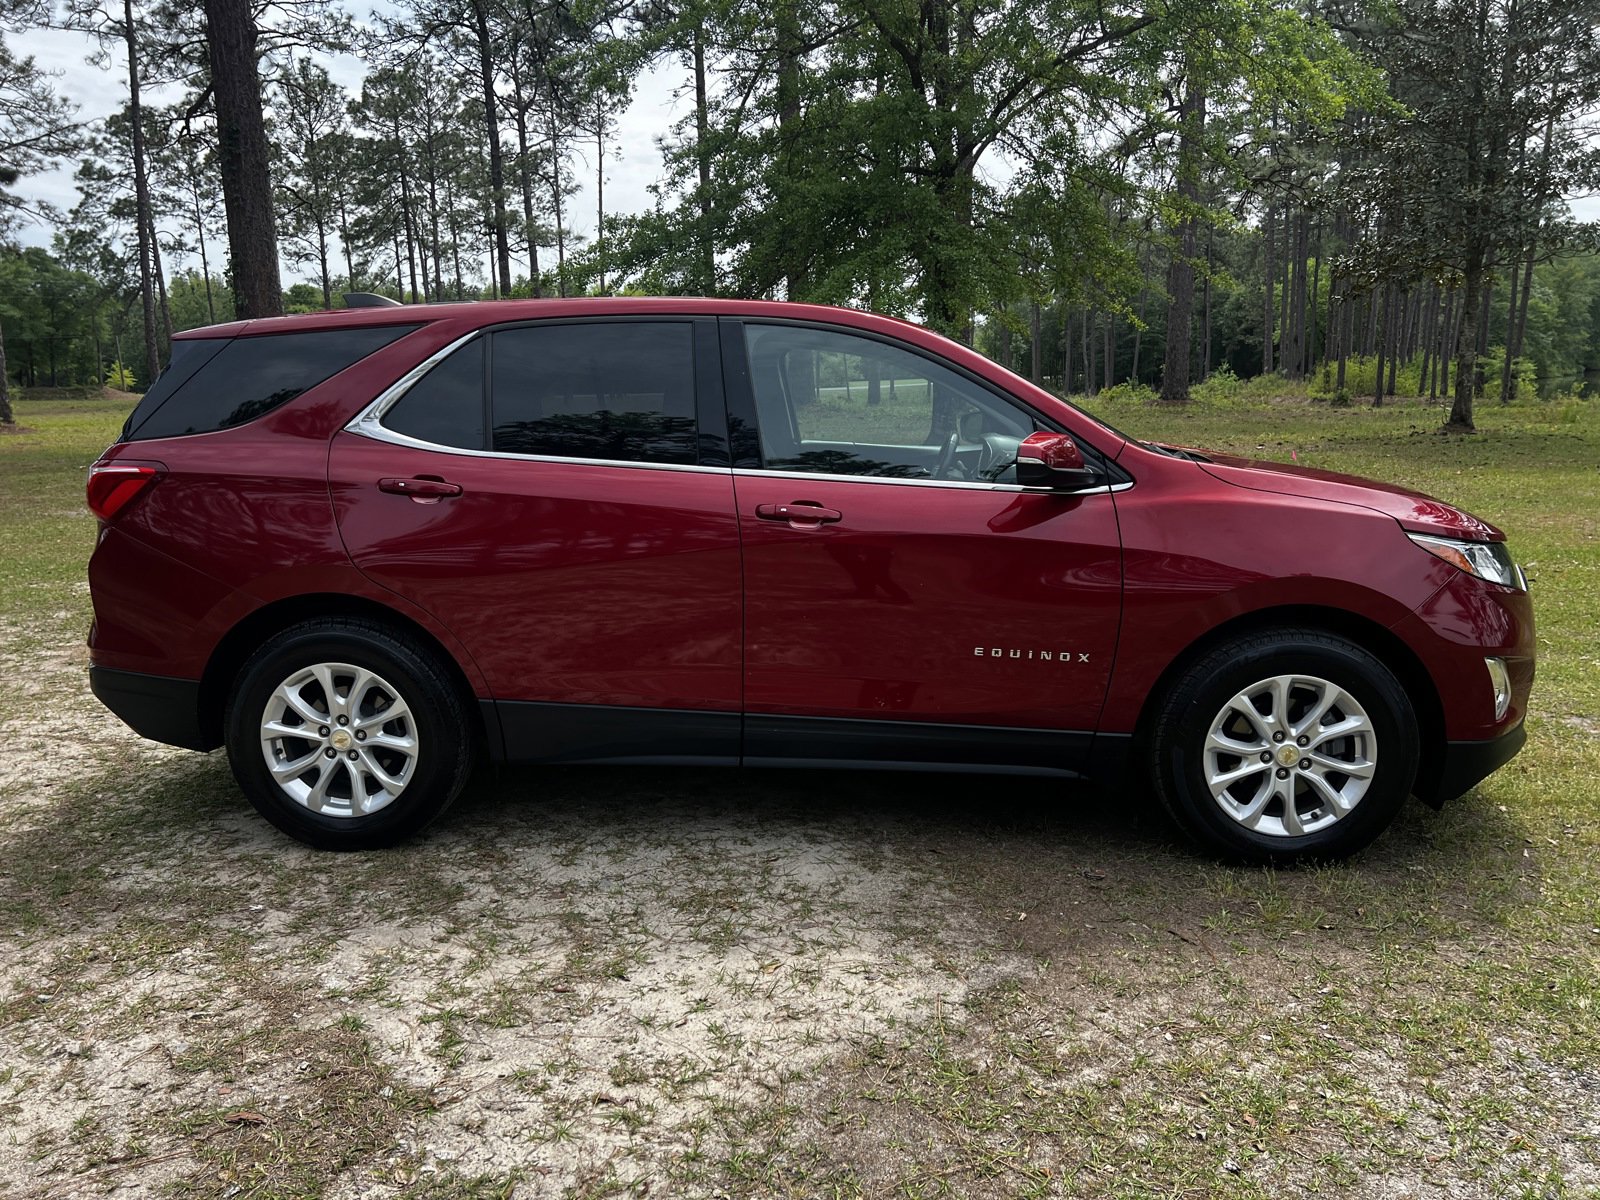 Used 2019 Chevrolet Equinox LT with VIN 2GNAXKEV2K6274737 for sale in Metter, GA